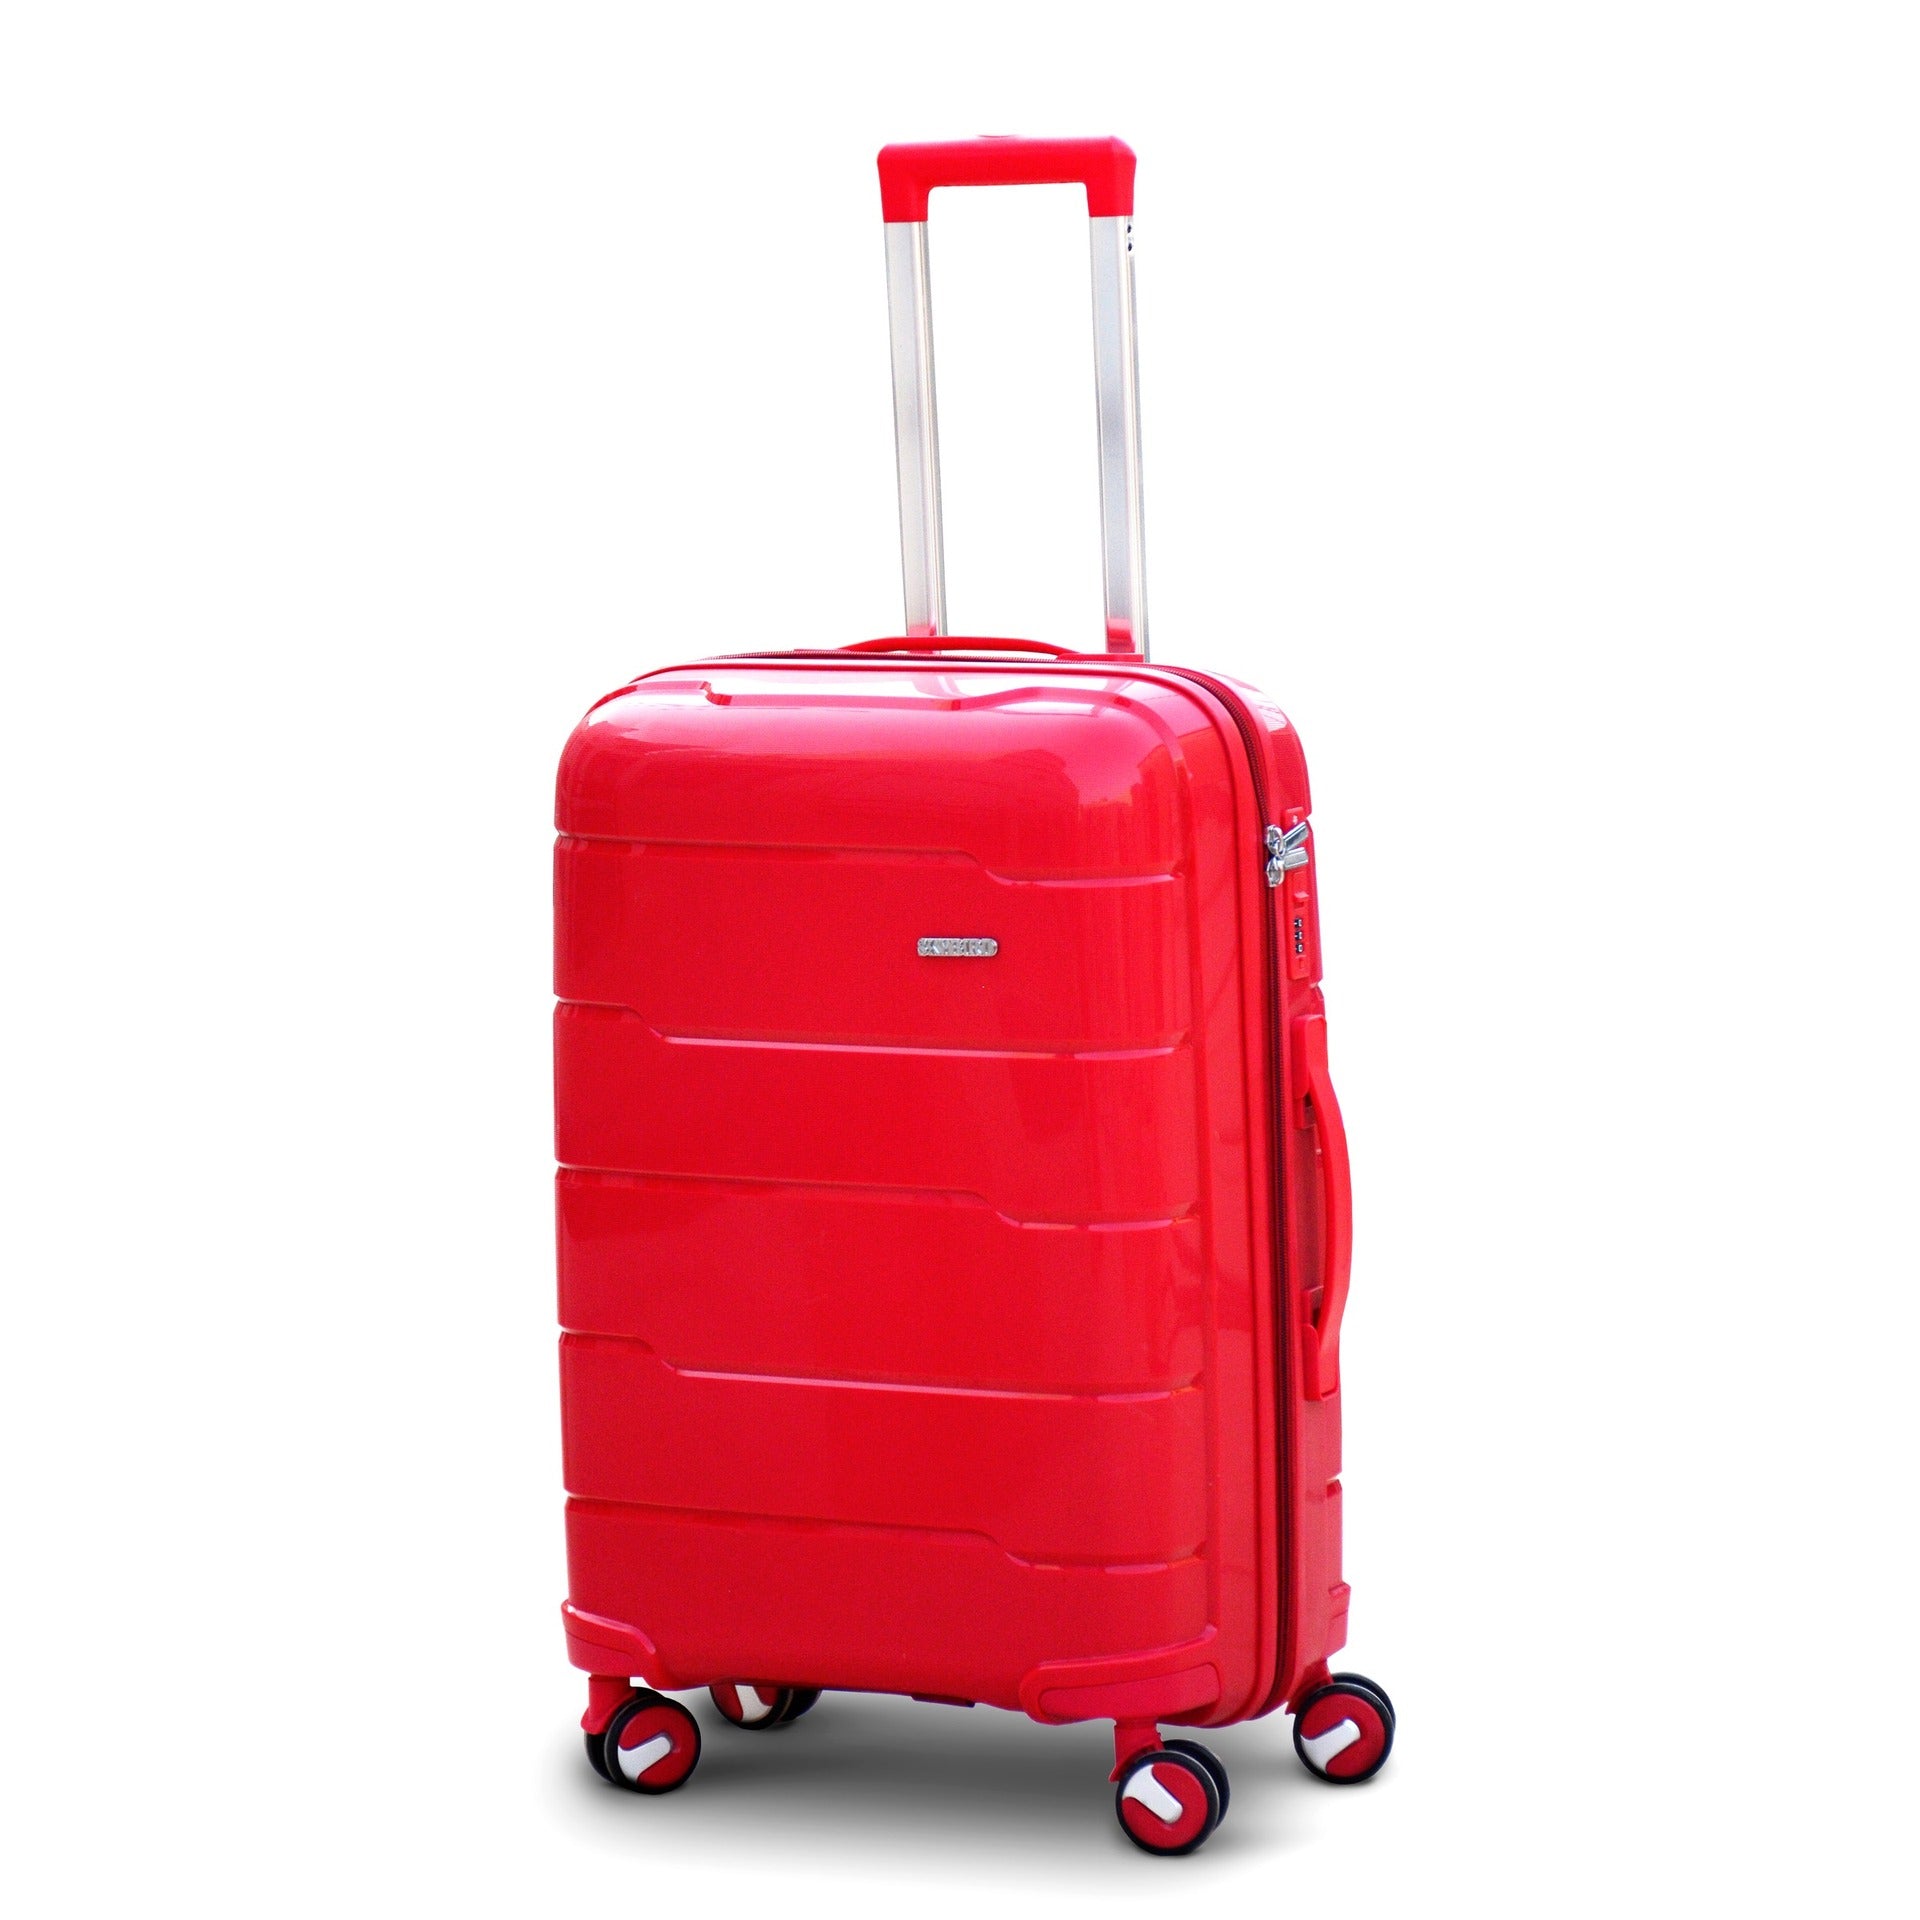 20" Red Colour Ceramic smooth PP Luggage Lightweight Hard Case Carry On Trolley Bag with Double Spinner Wheel